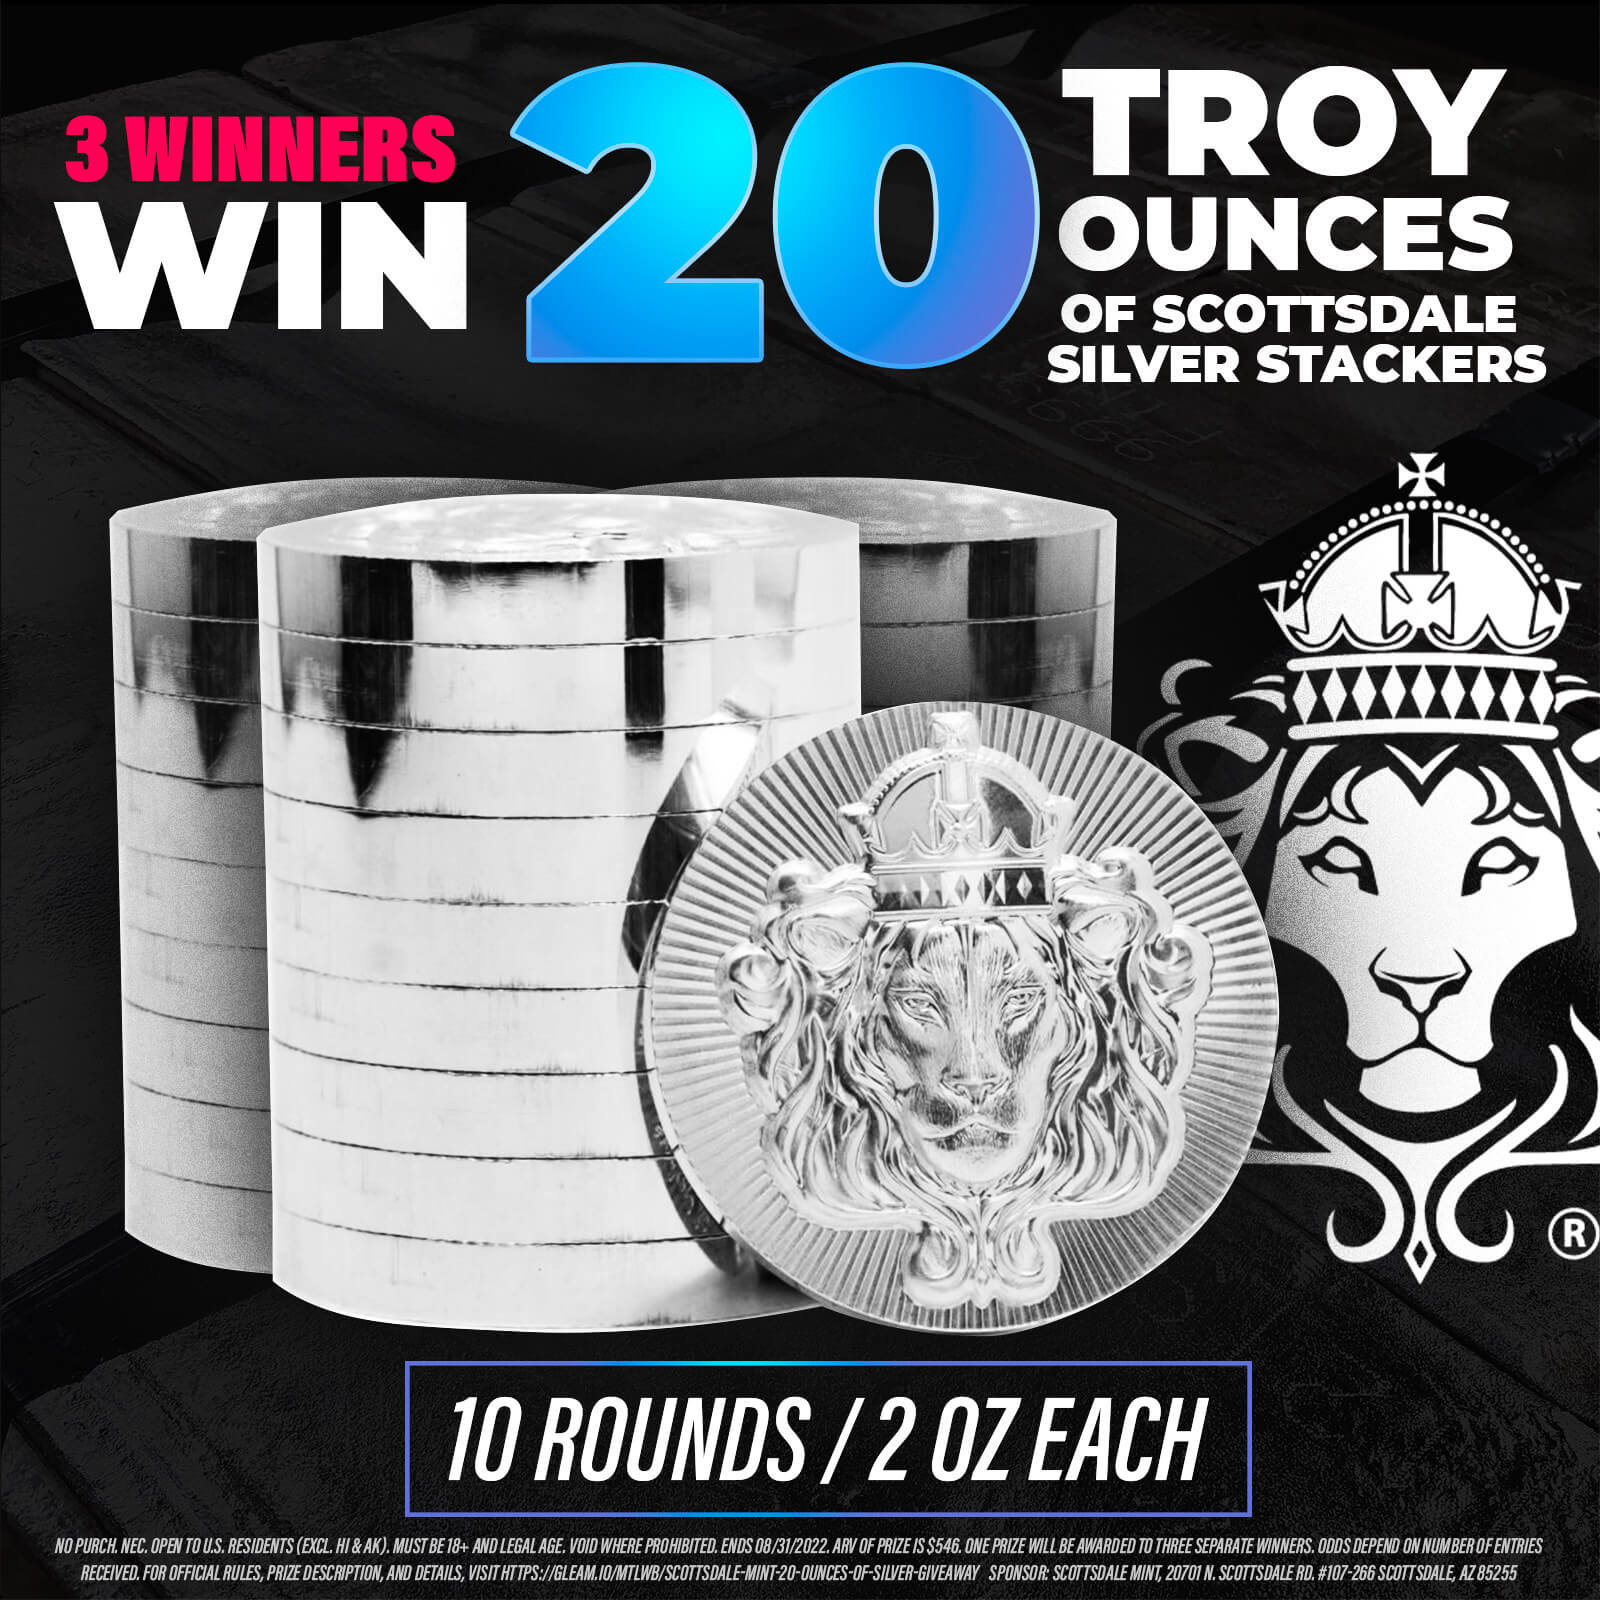 Scottsdale Mint 20 Oz Silver Stackers Giveaway